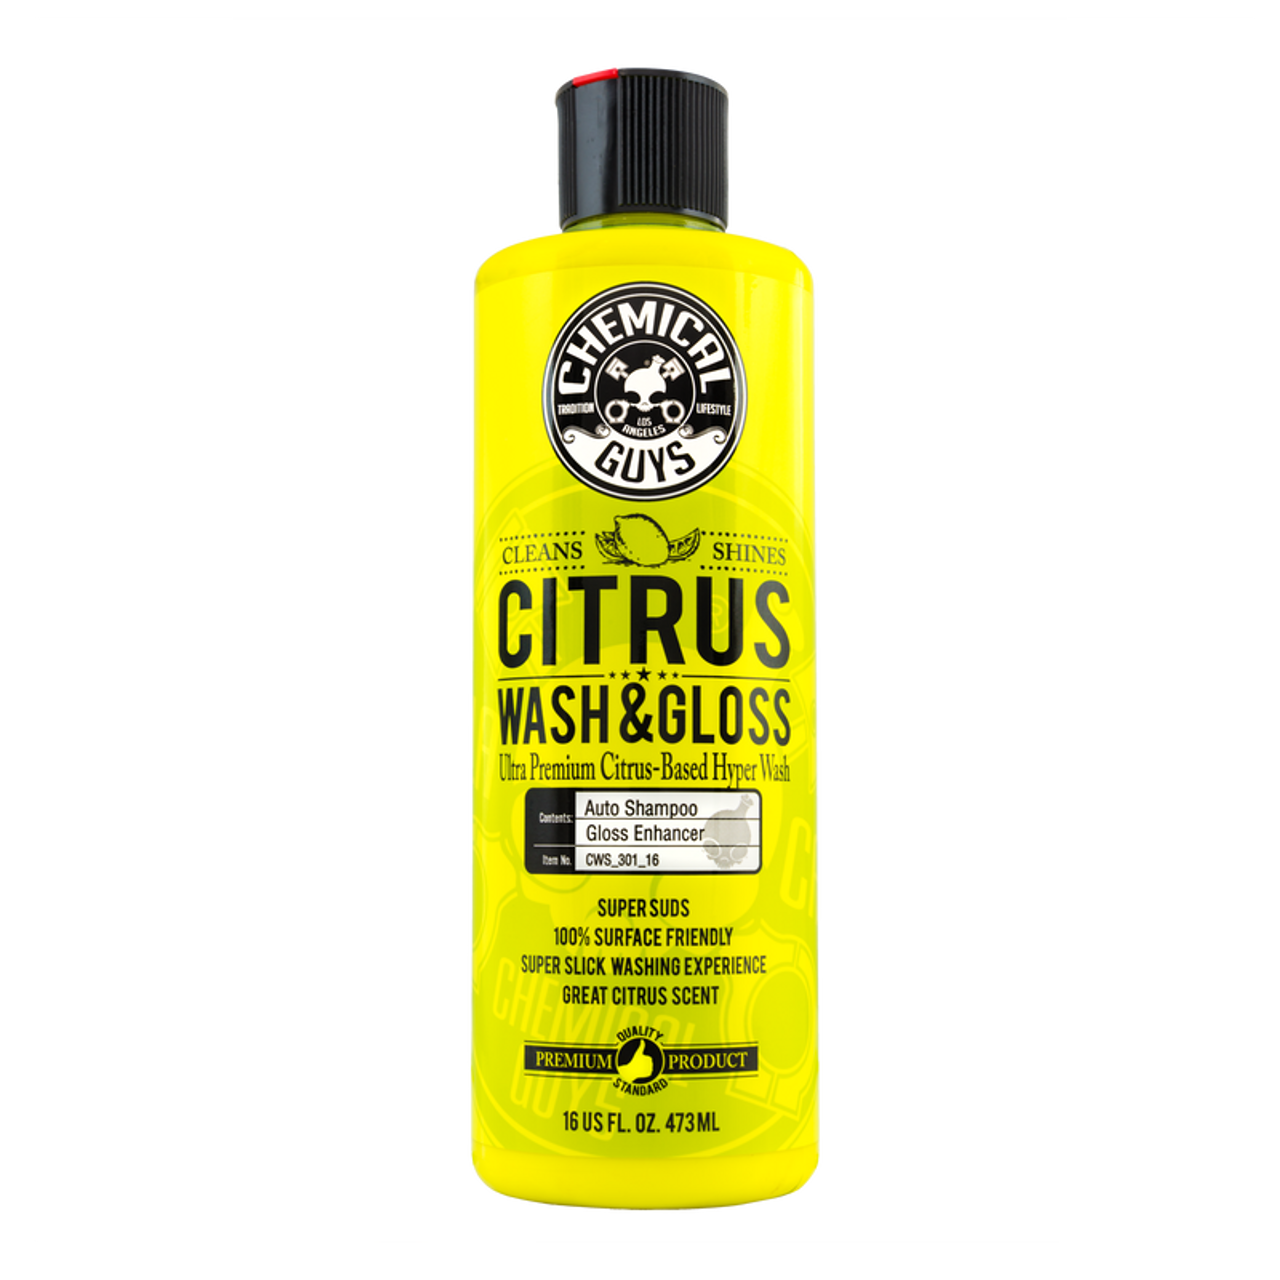 CHEMICAL GUYS CITRUS WASH & GLOSS CONCENTRATED ULTRA PREMIUM HYPER WASH & GLOS